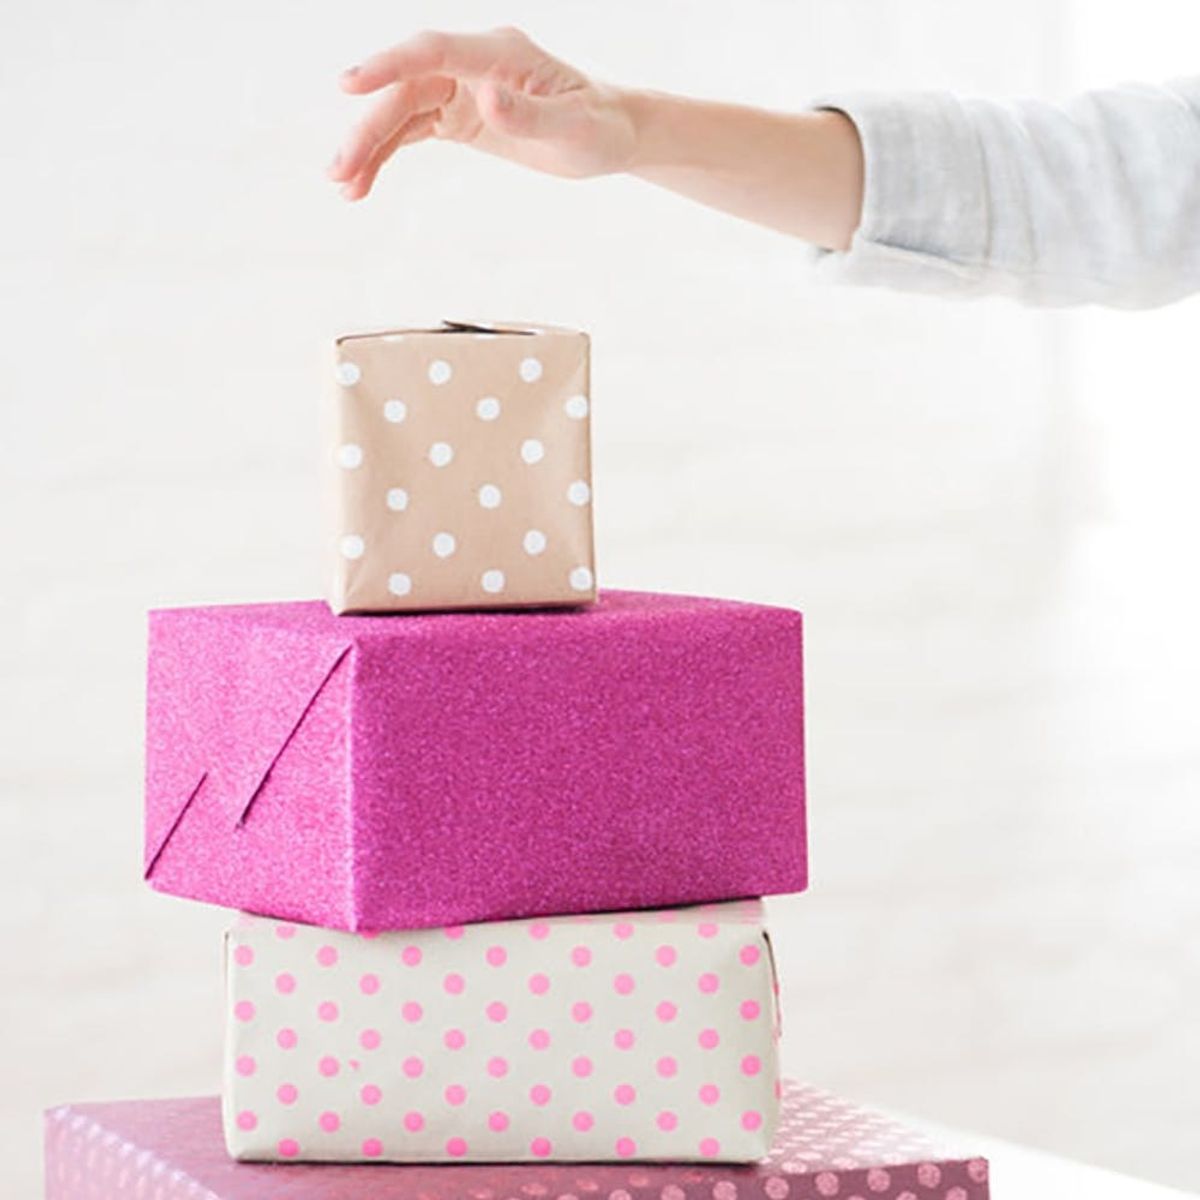 Gift Wrap Hacks to Make Sure Your Present Is the First One Opened